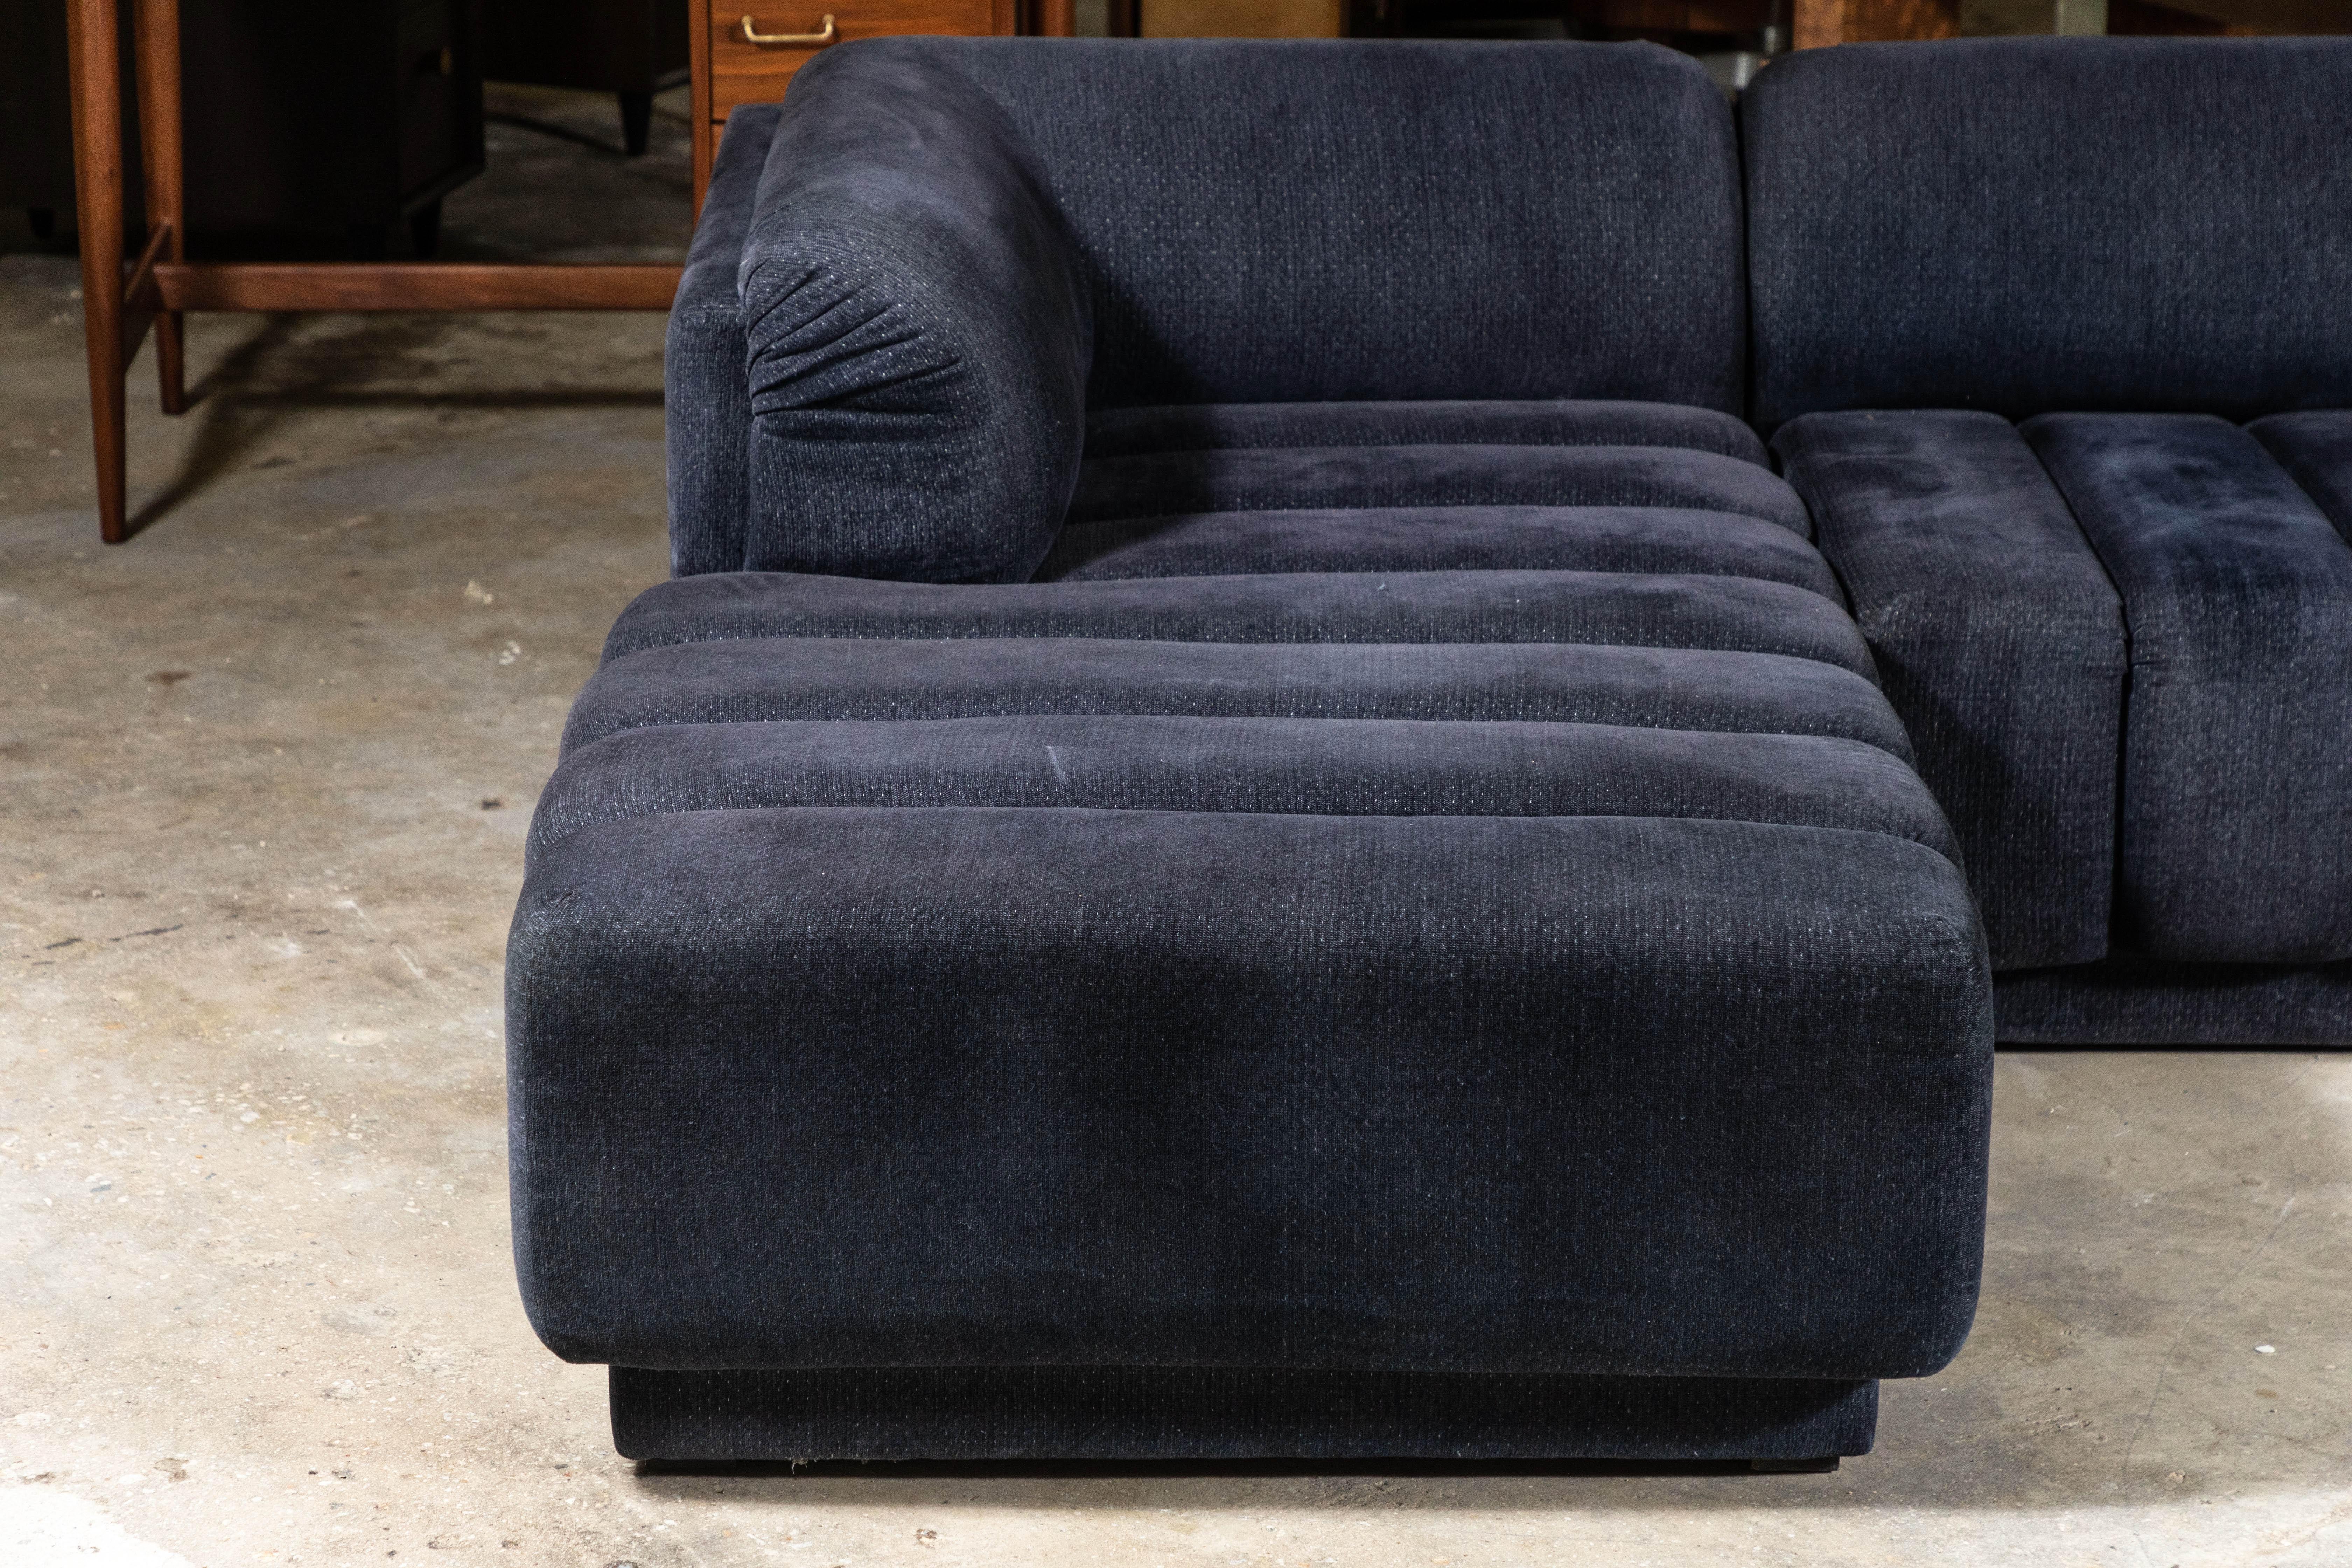 Gorgeous 2-piece sectional sofa by Directional. Designer unknown, but the names Paul Evans, Vladimir Kagan, Milo Baughman, Paul McCobb all designed for Directional. An amazing design regardless. Dark blue grey velvet like soft fabric. This is a rare